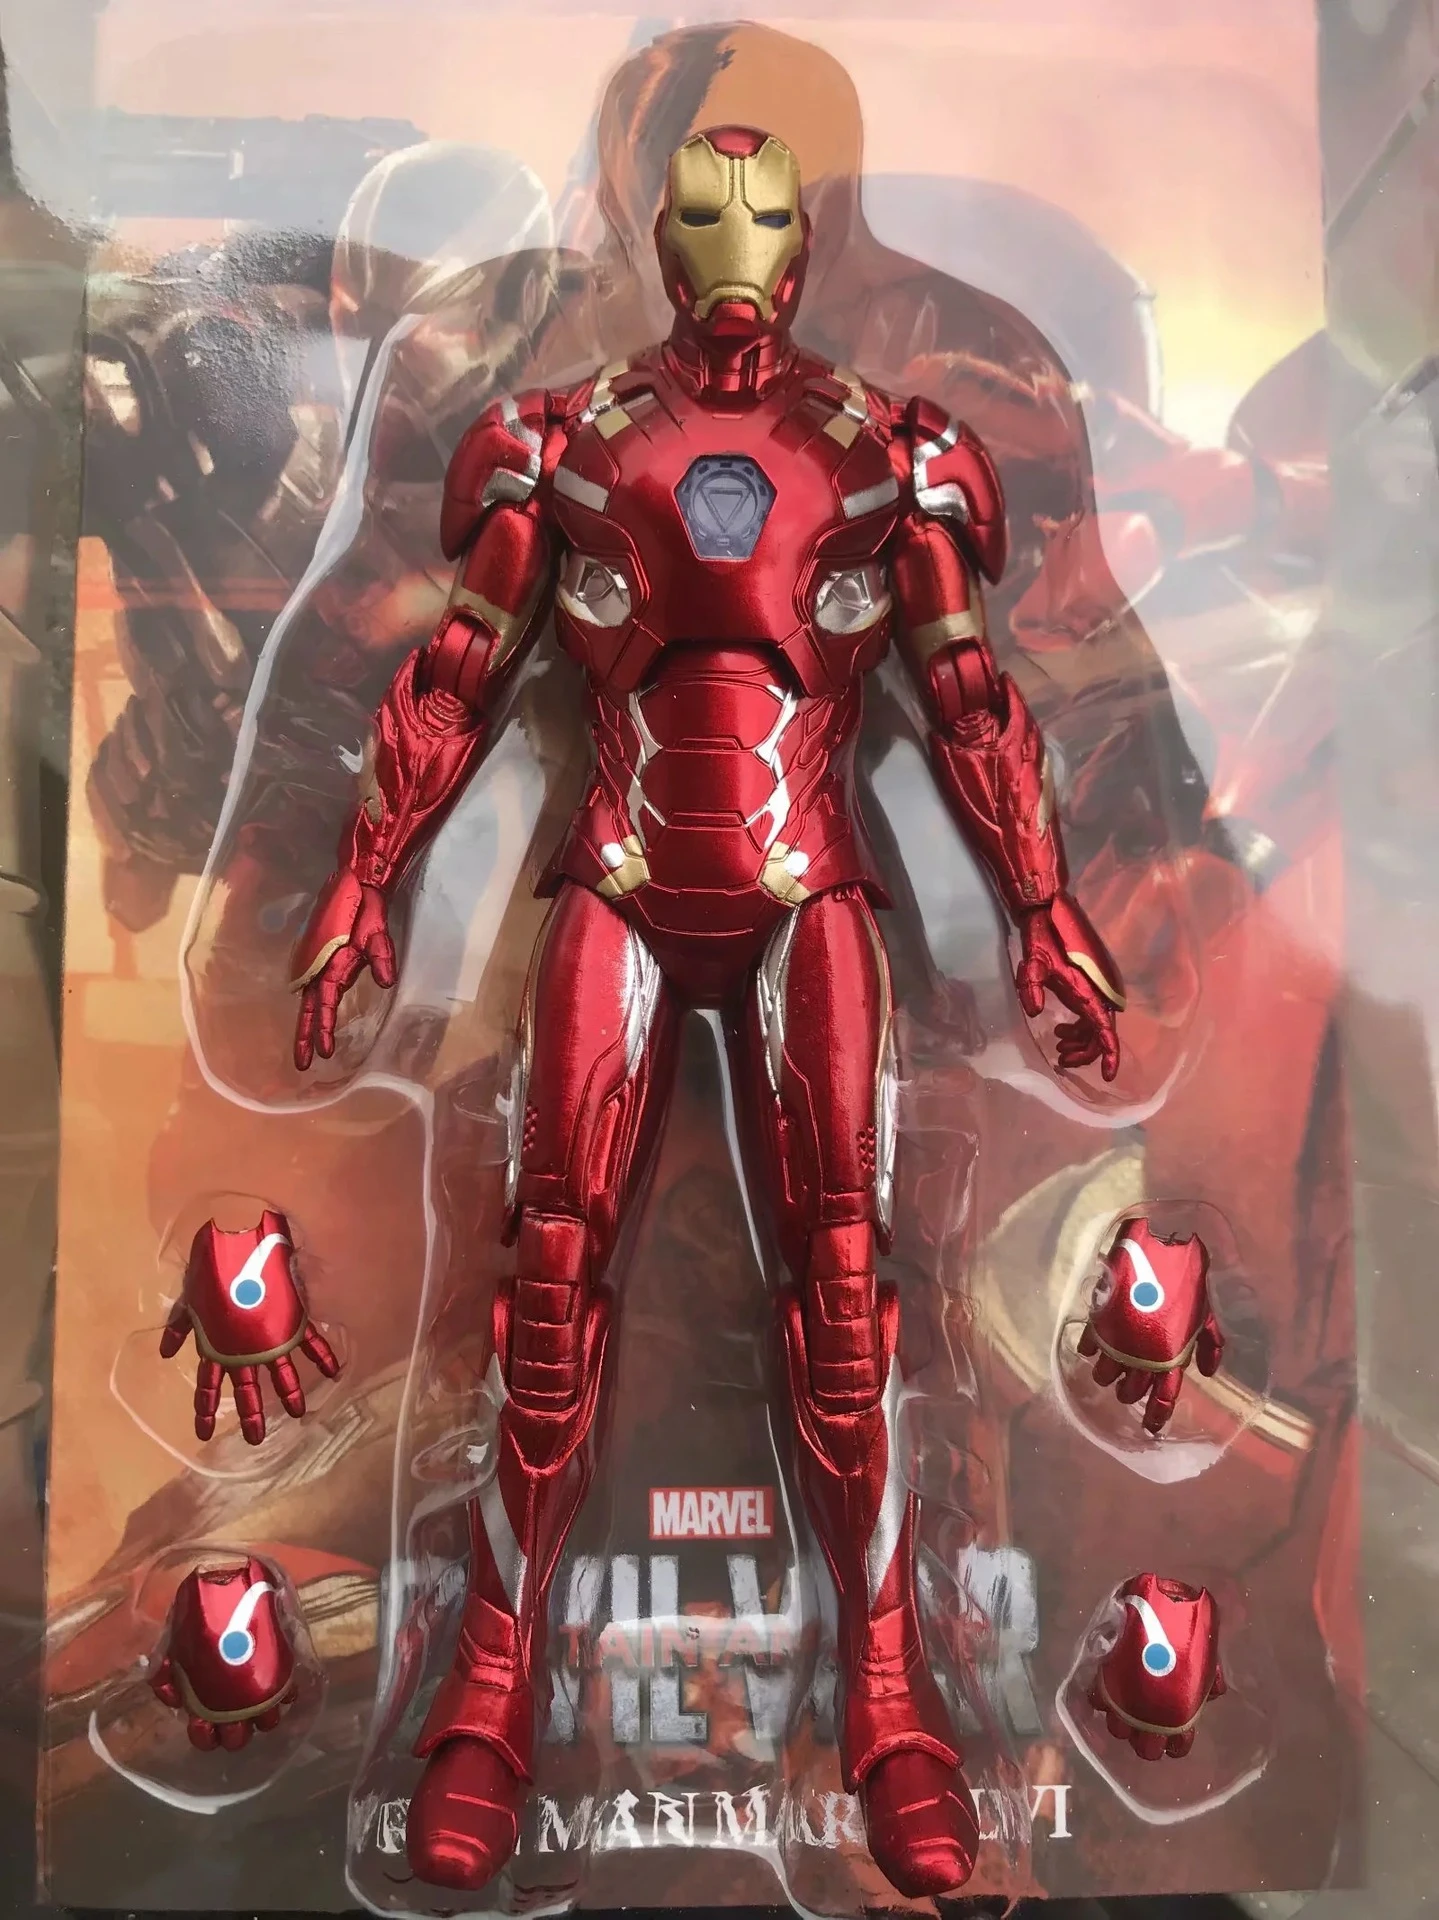 Marvel Ironman MK46 LED light 17cm Articulated Action Figure Toys